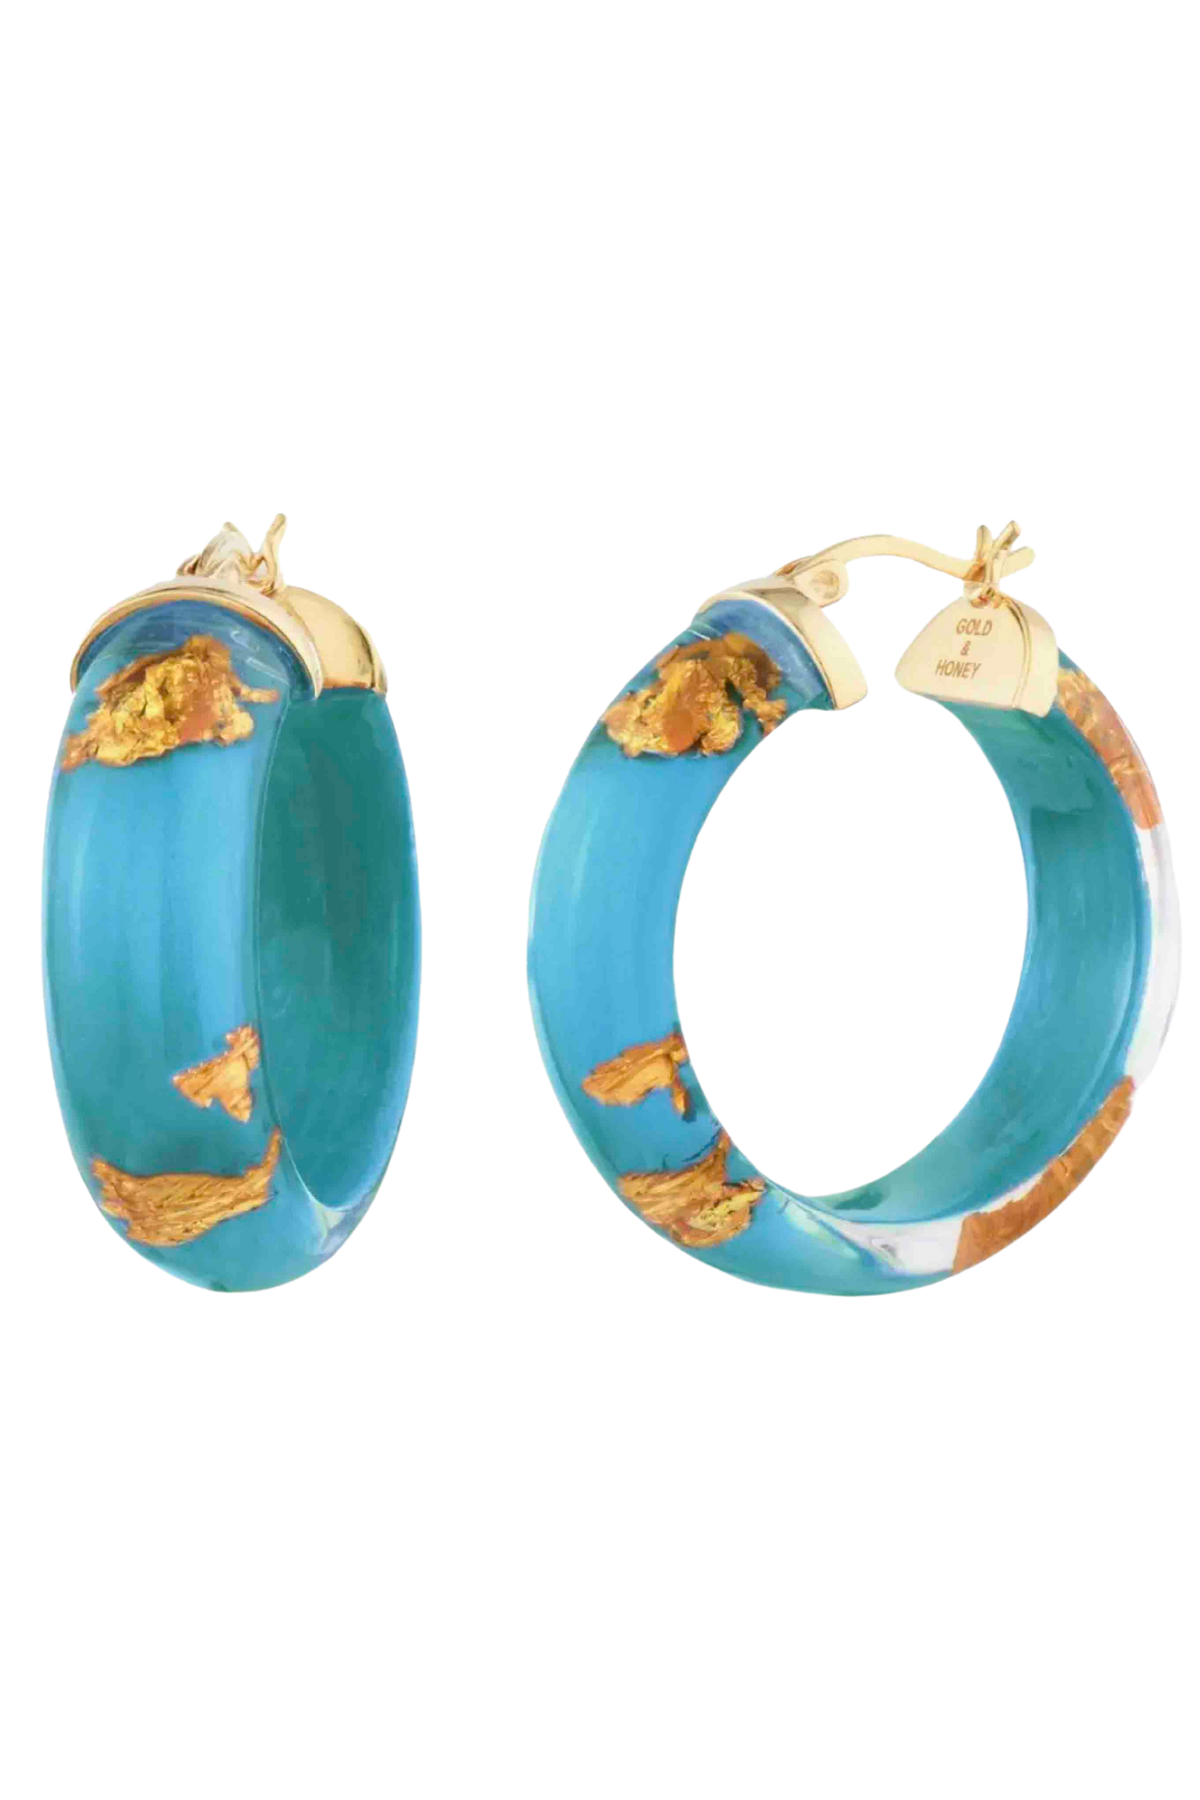 Teal colored Products 24K Gold Leaf Hoops by Gold and Honey